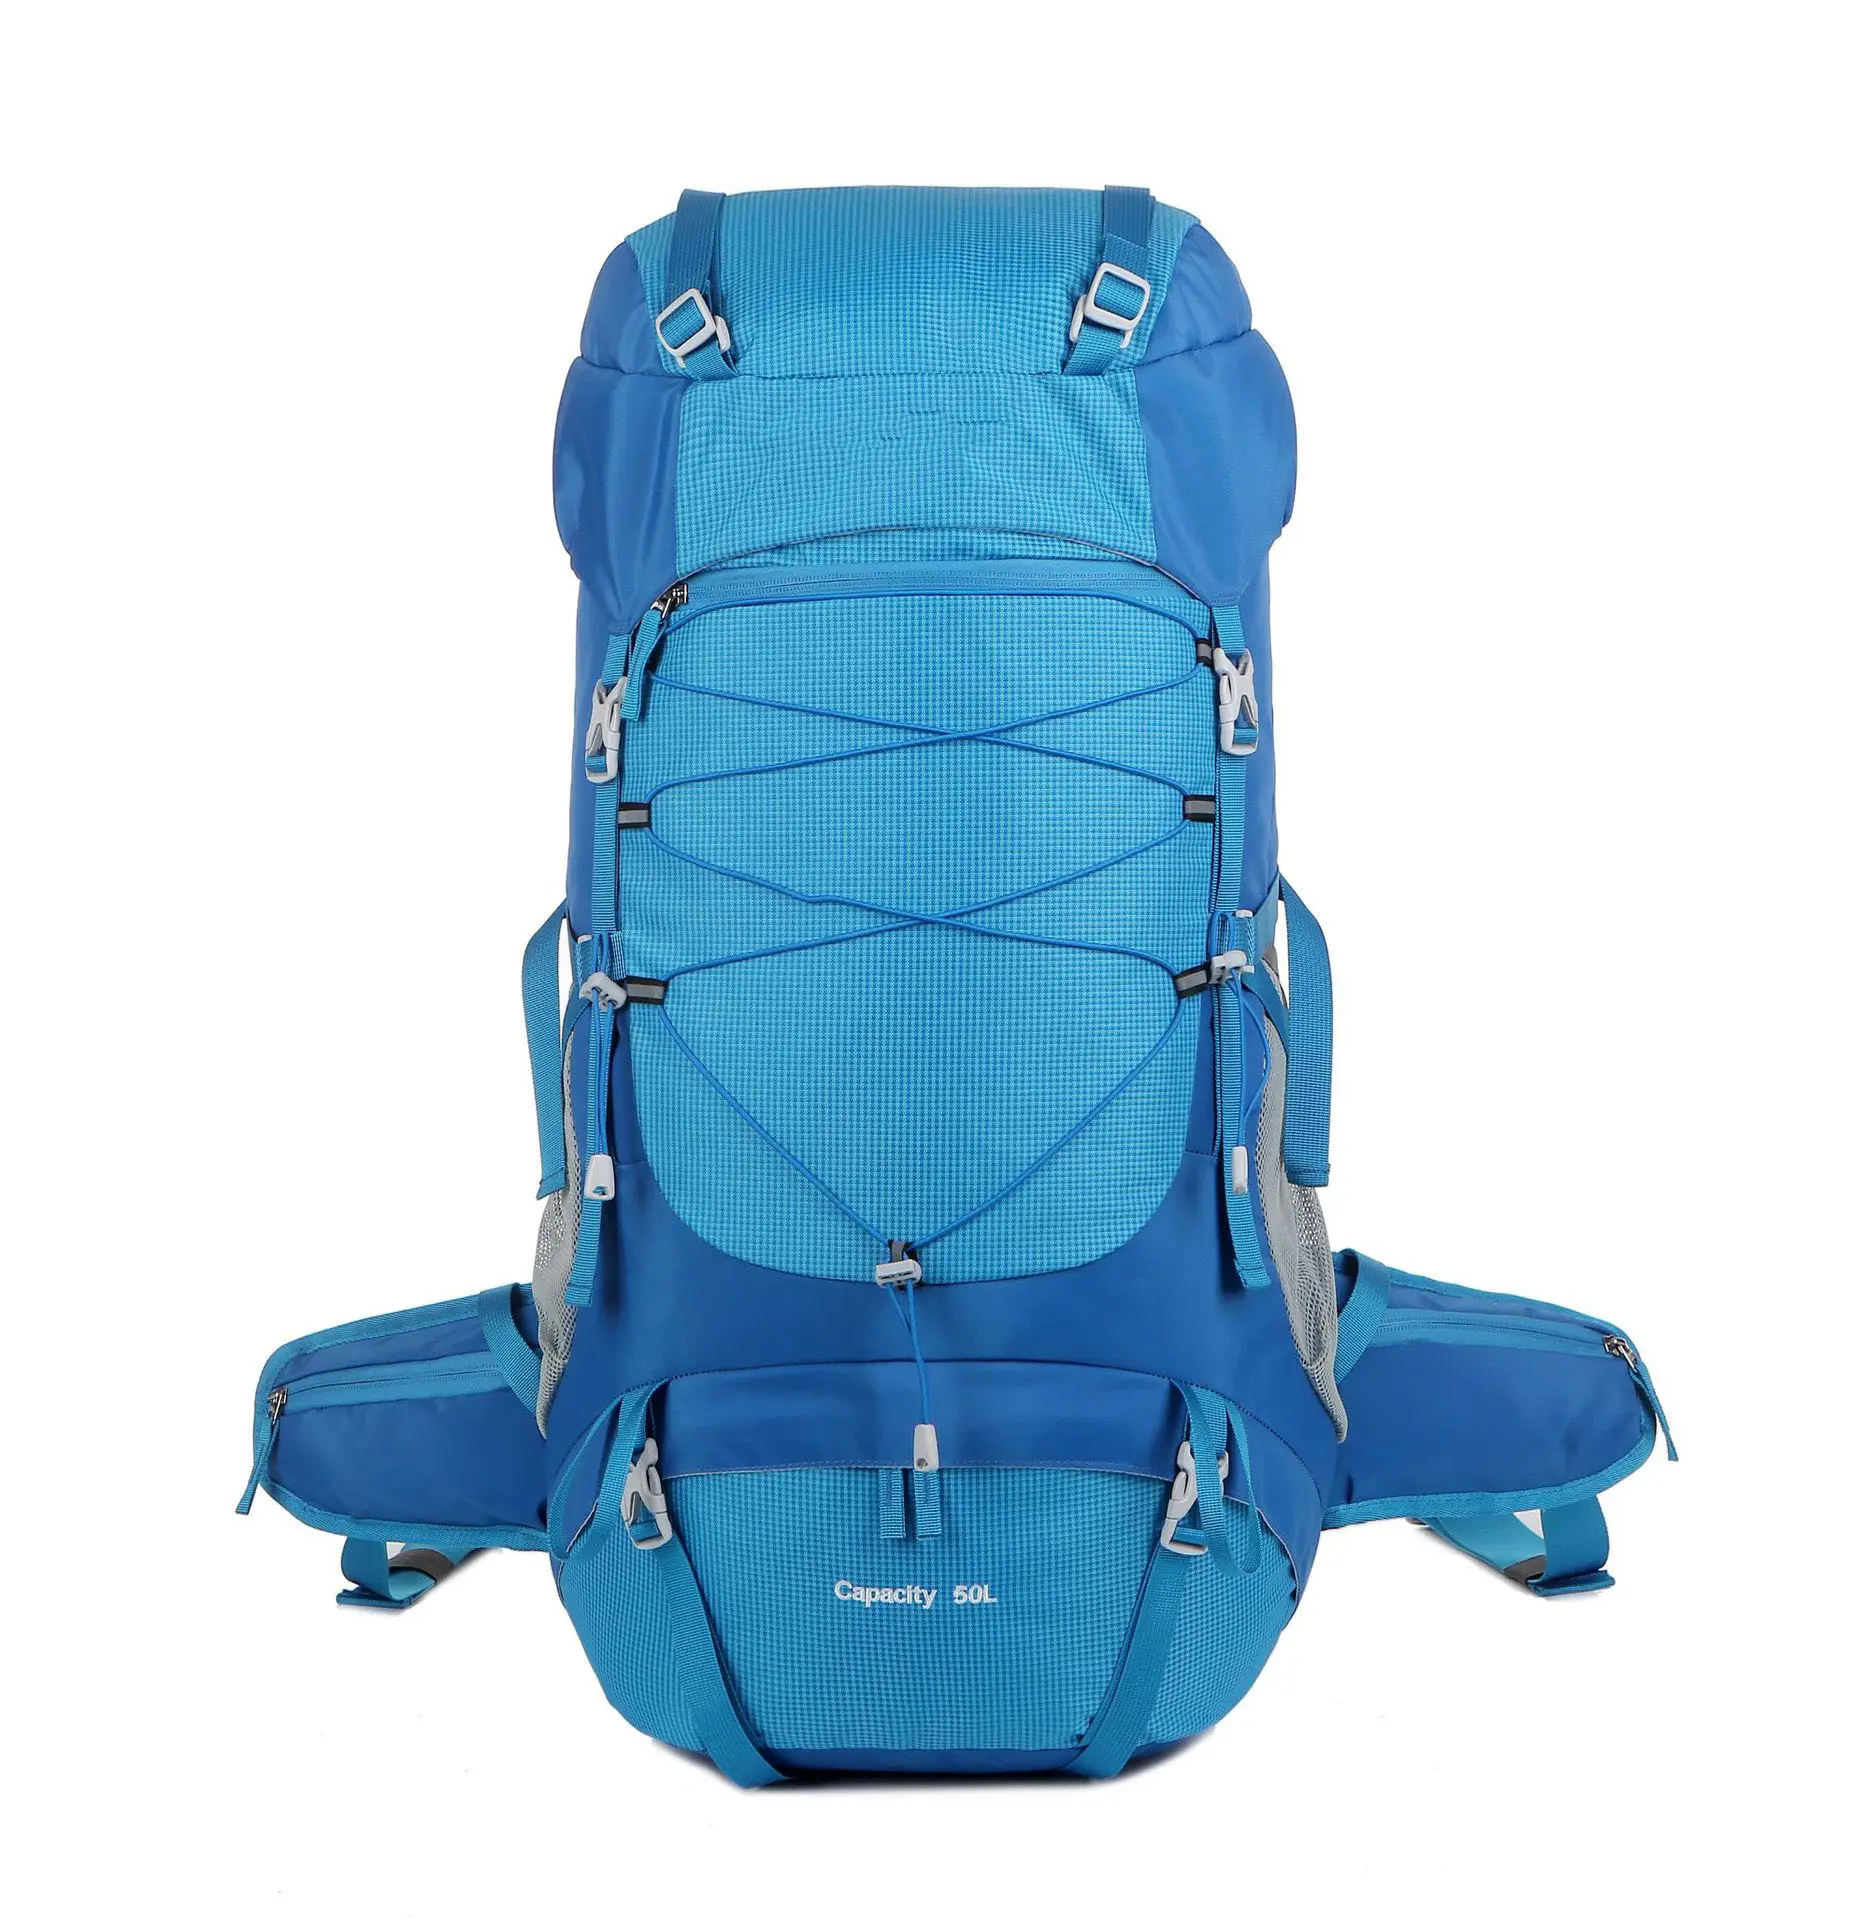 Wholesale 50L Outdoor Waterproof Mountain Climbing Backpack Bag for Hiking Travel Camping